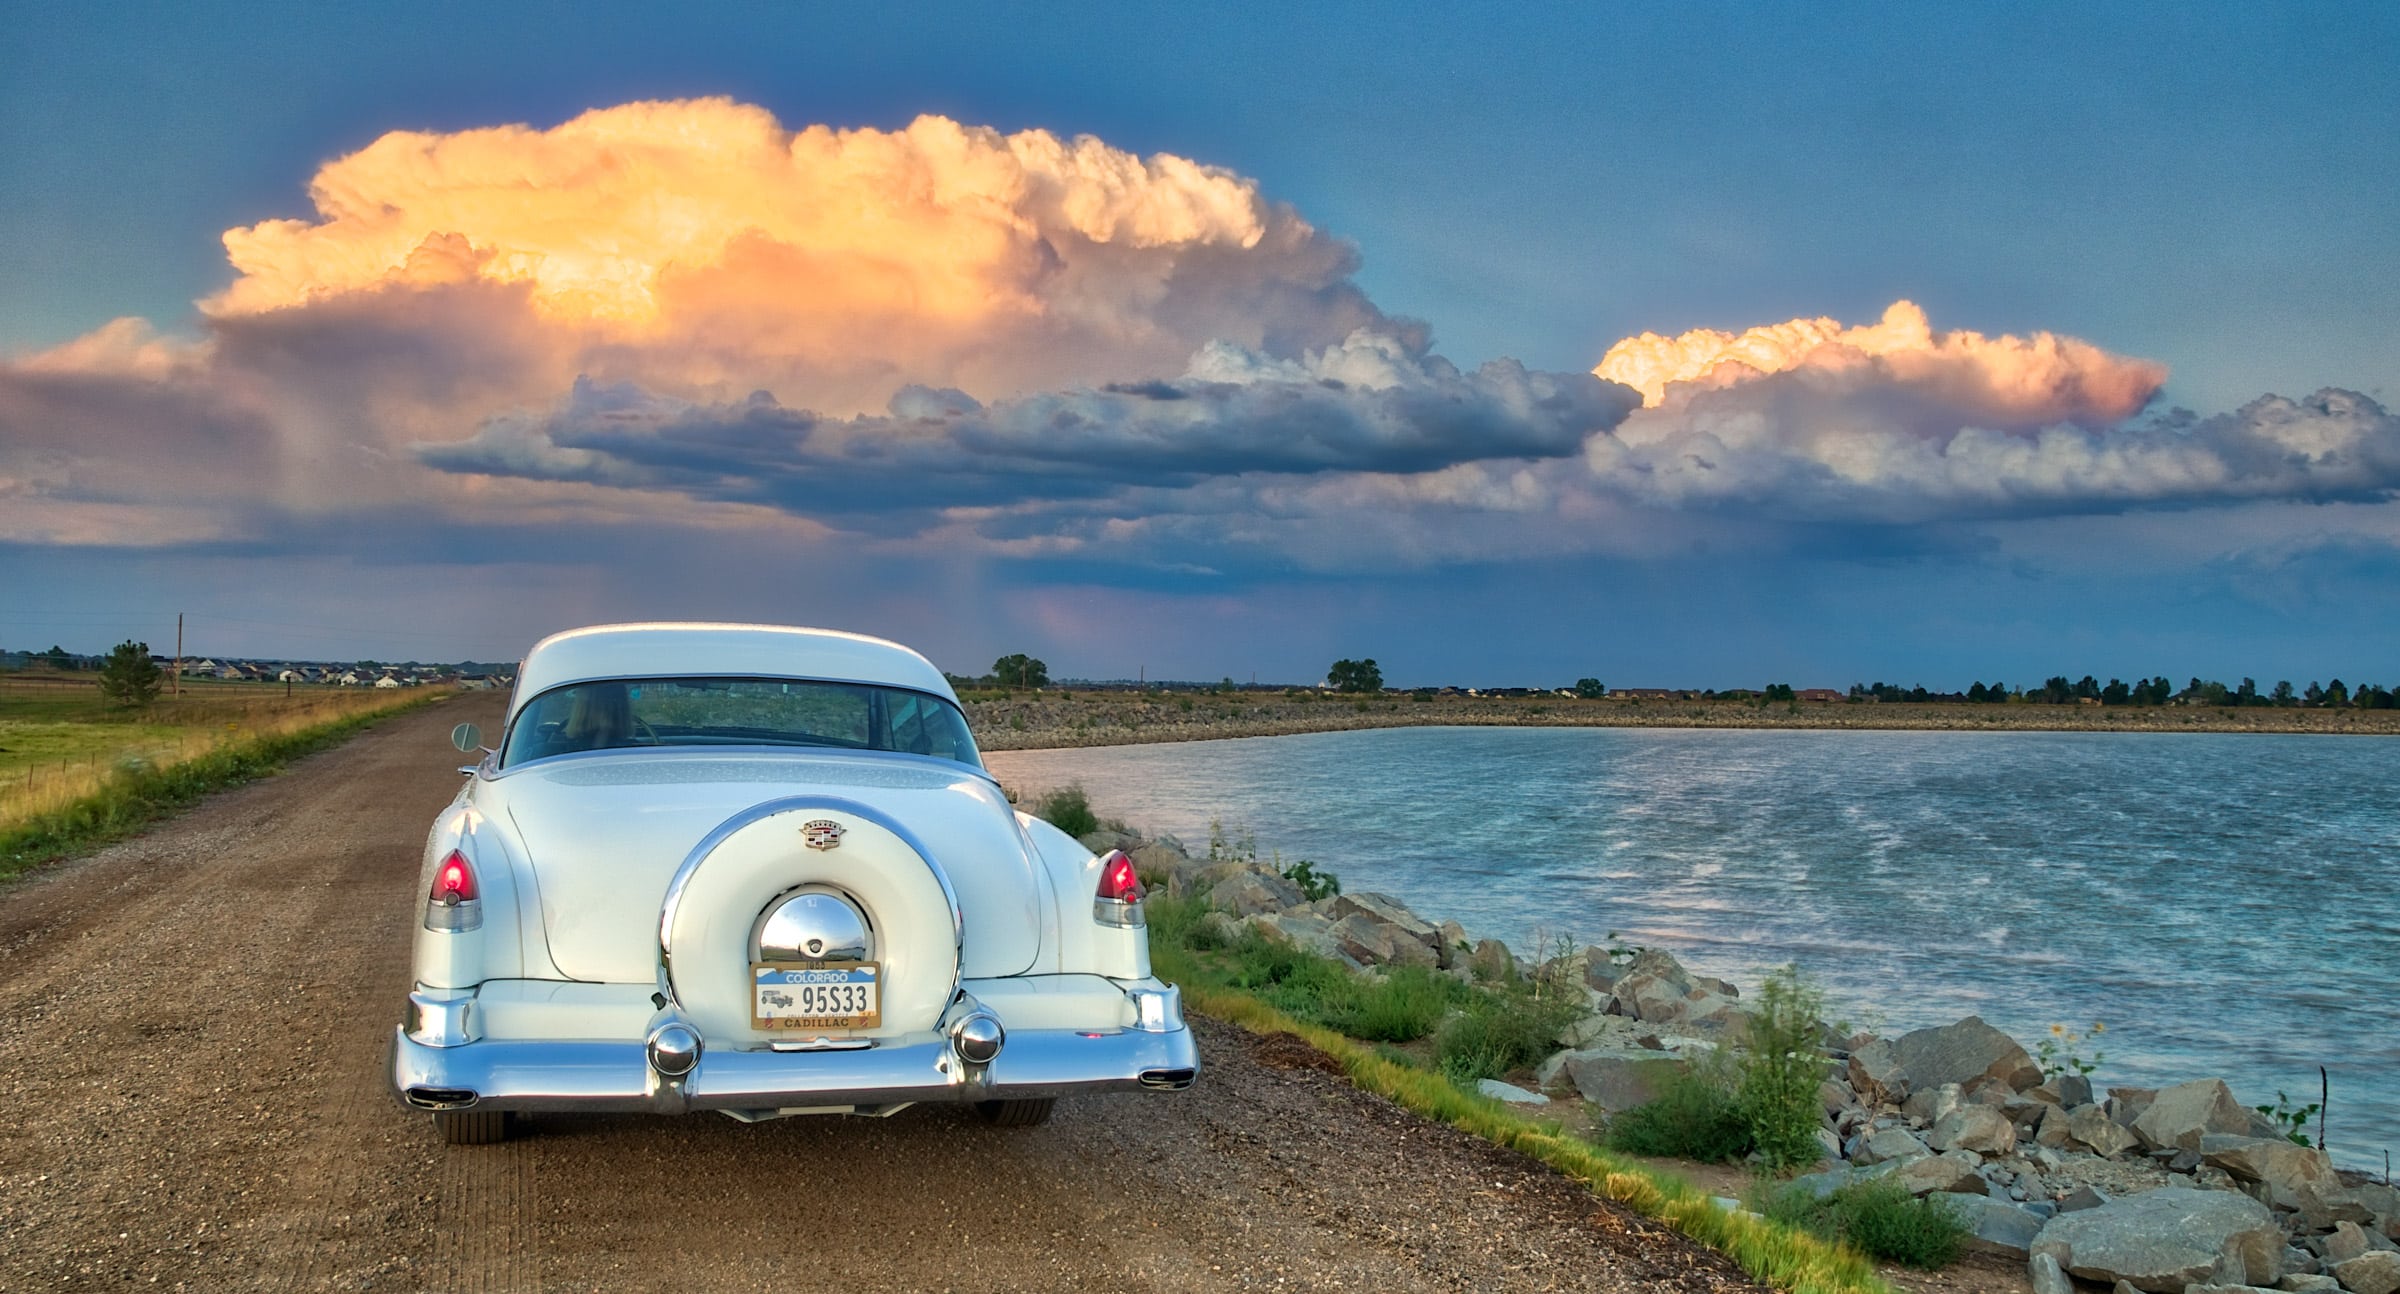 1953 Cadillac Coupe deVille - Rear view with Continental Kit. Storm clouds in the distance.